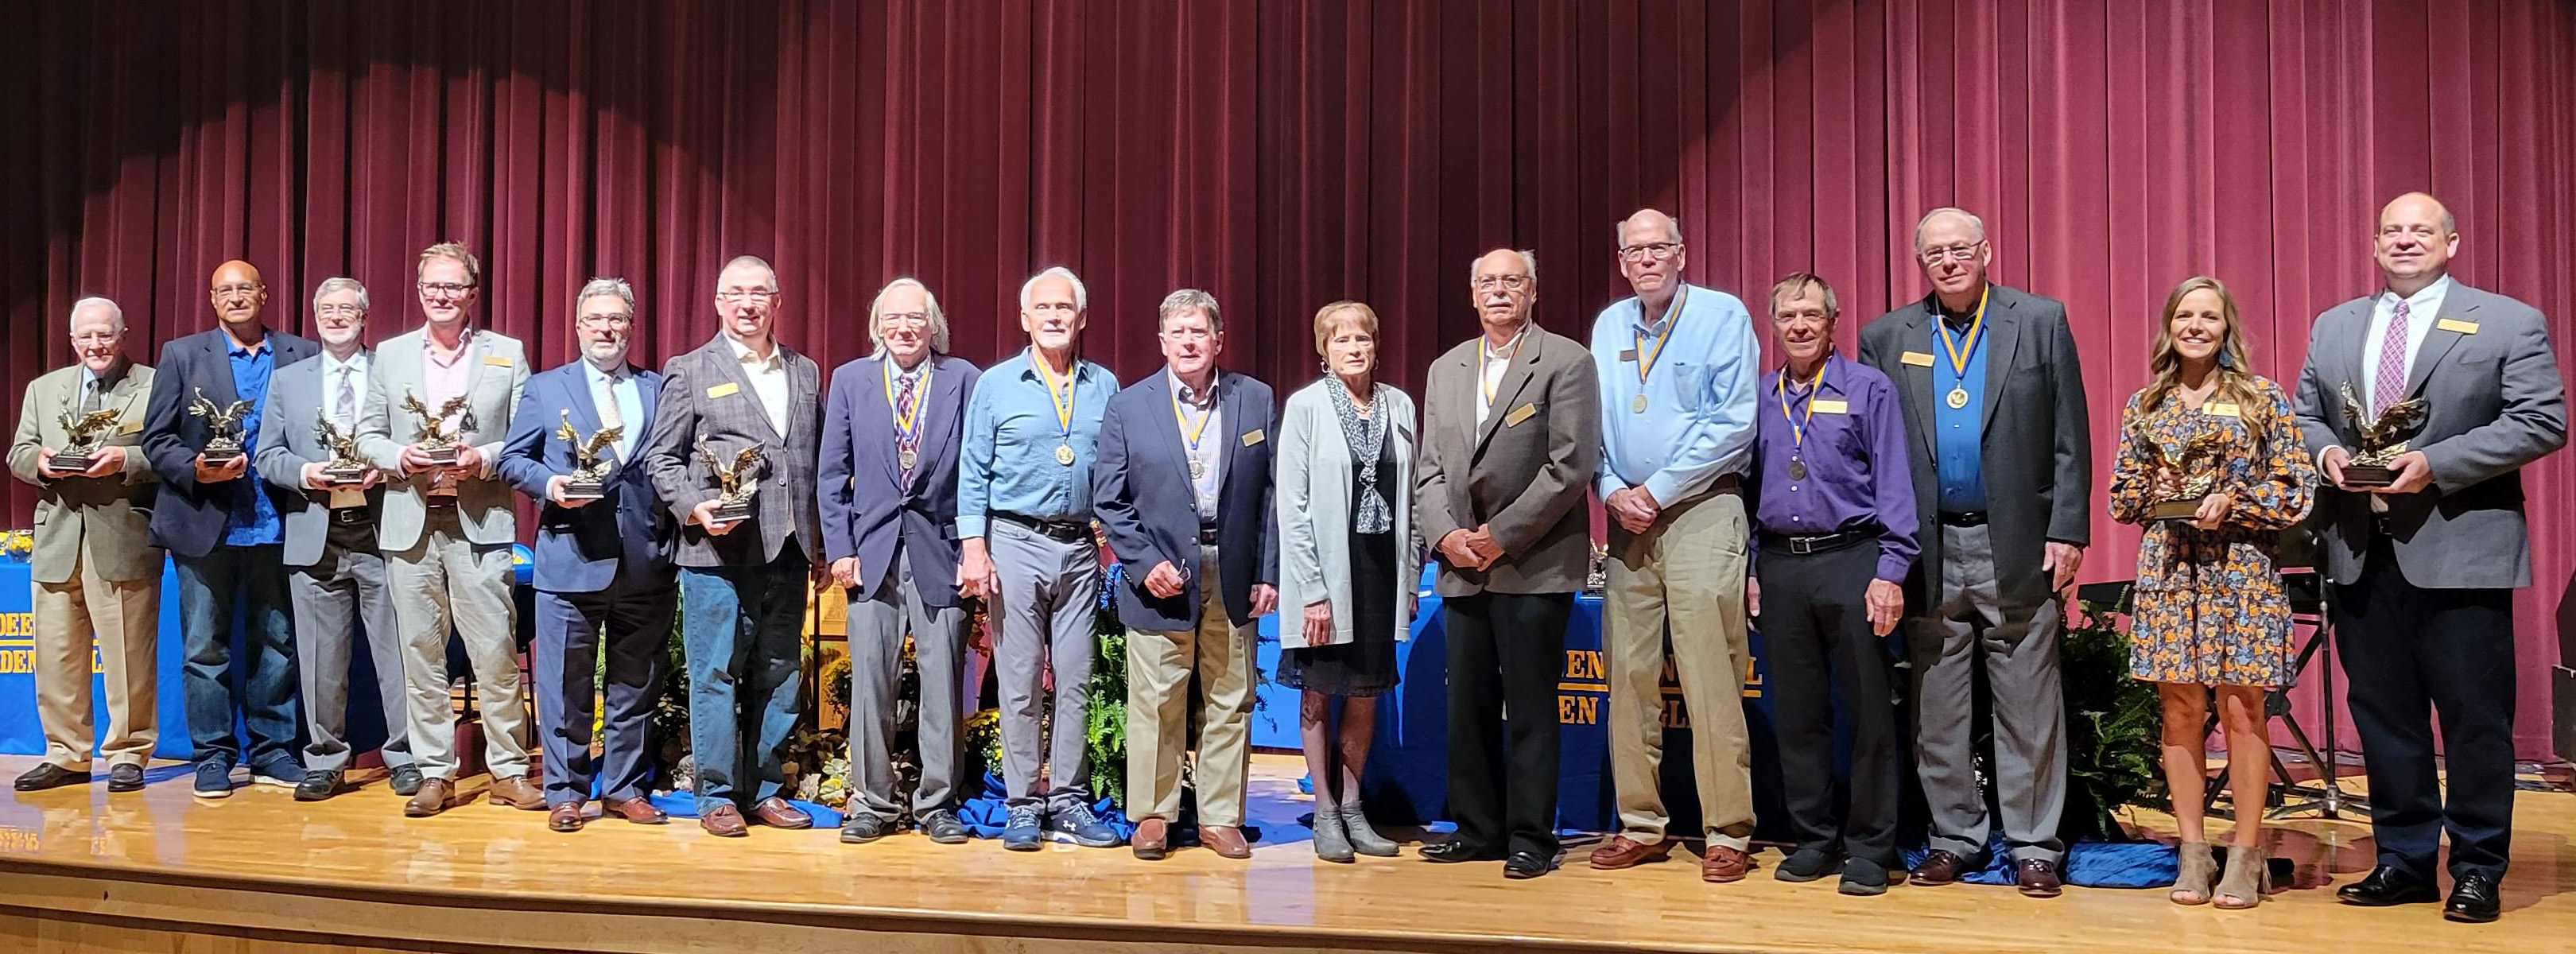 2021 Aberdeen Central High School Hall of Fame Inductees